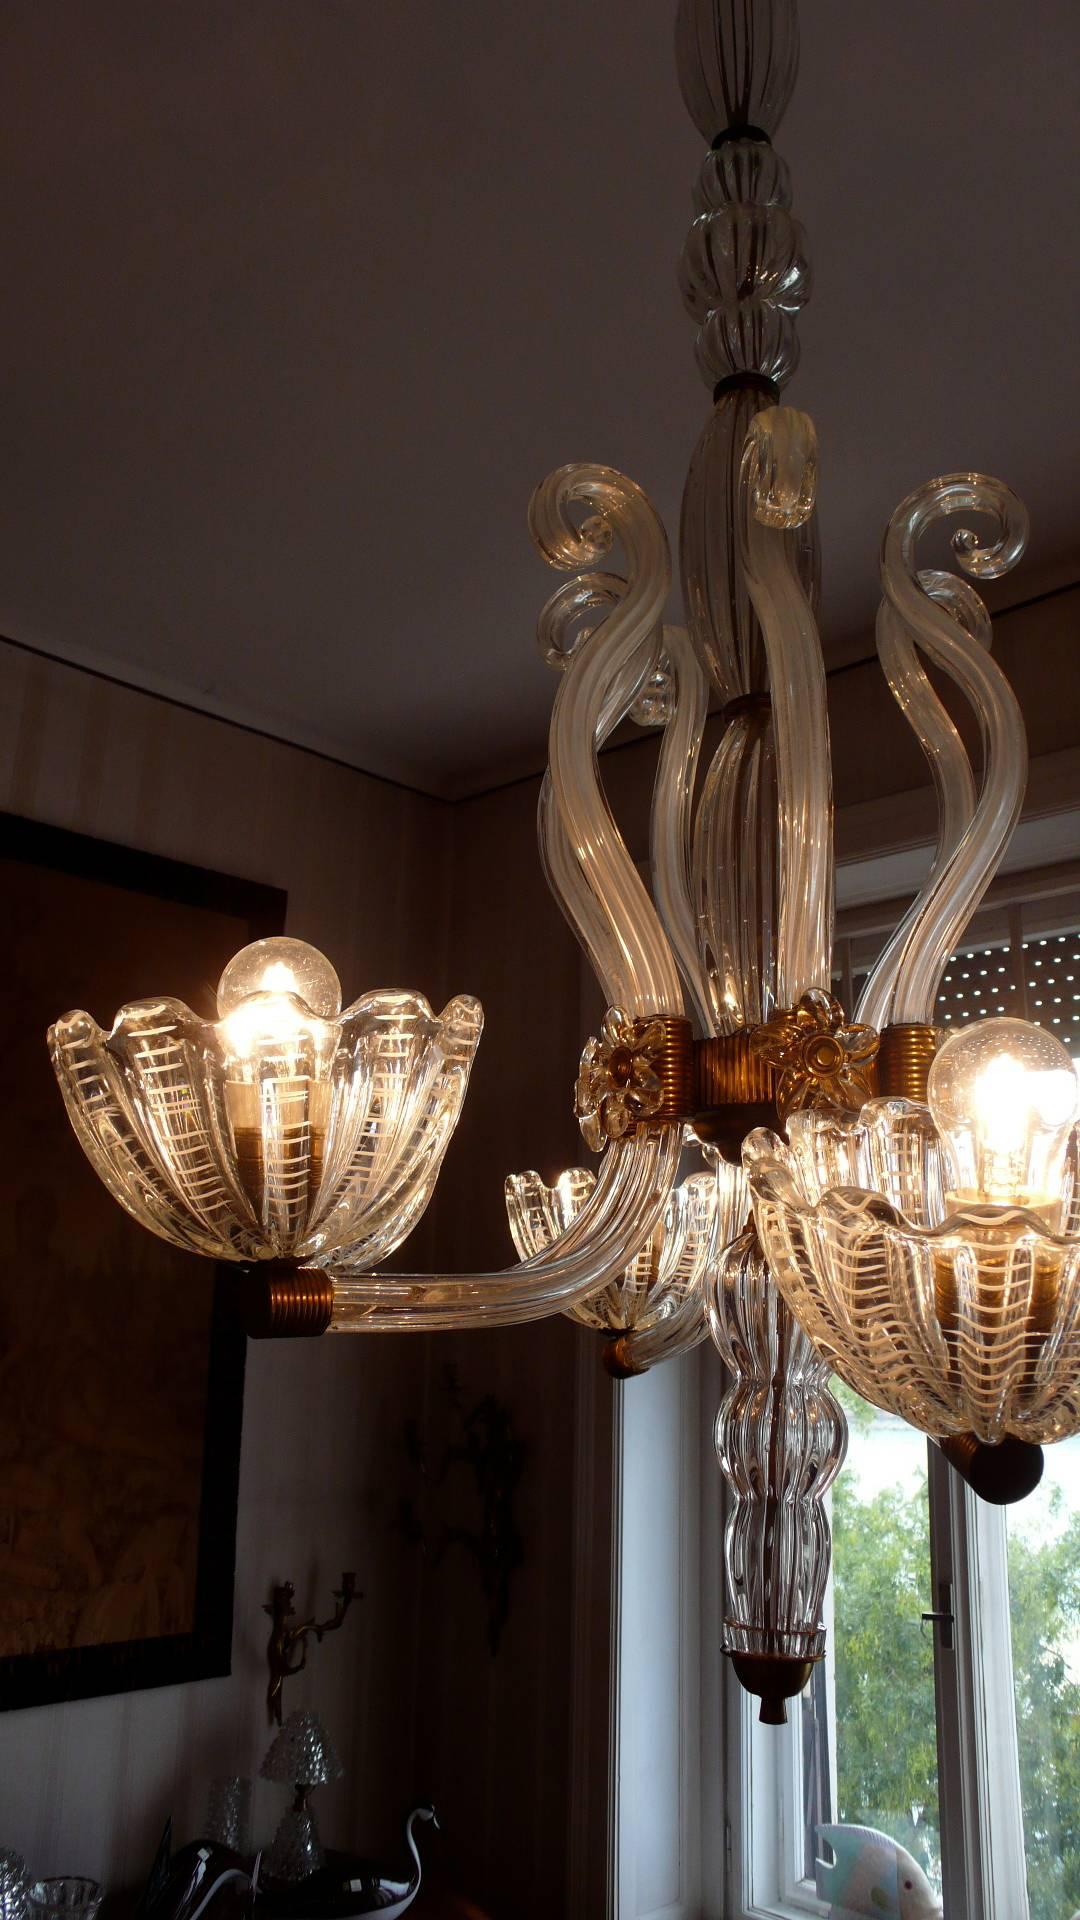 20th Century Royal Chandelier by Barovier & Toso, Murano, 1940s